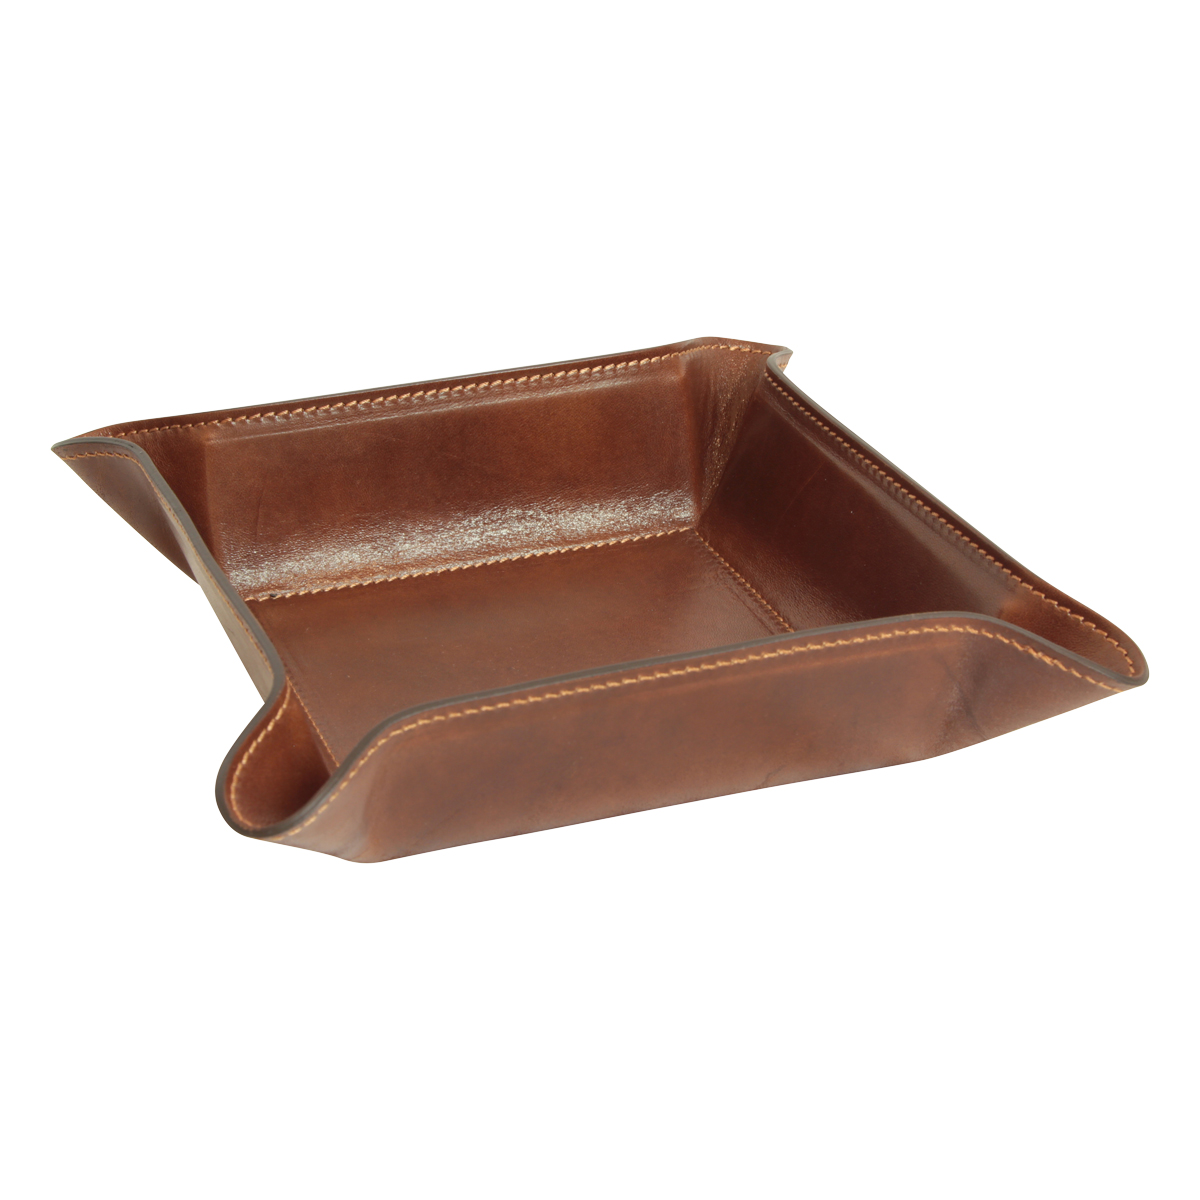 Leather Catchall Tray - Brown | 751005MA UK | Old Angler Firenze